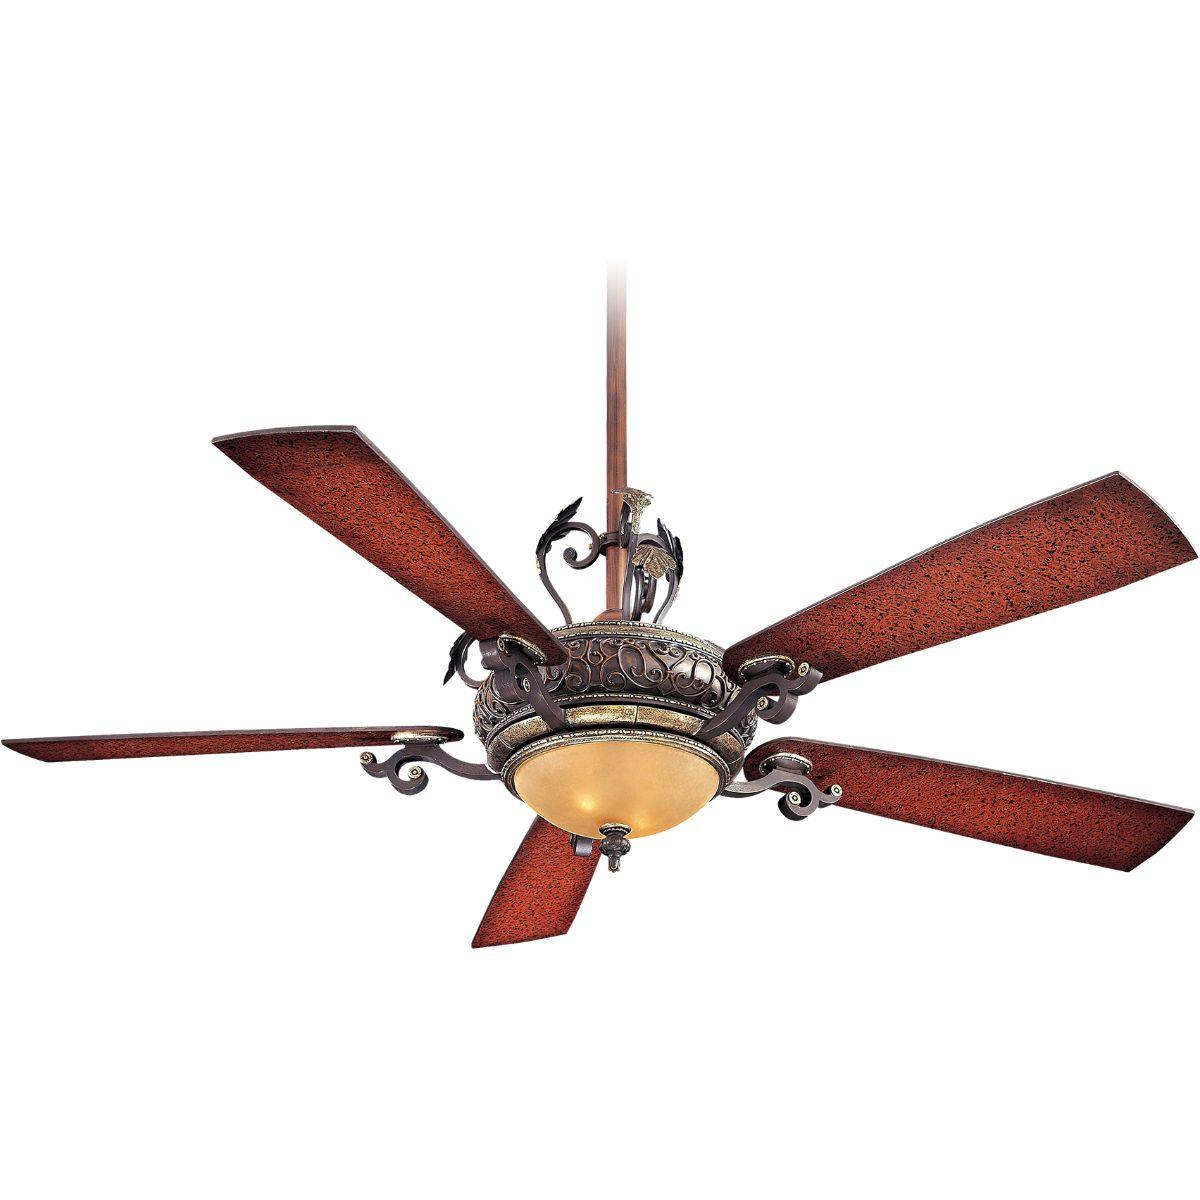 Napoli 56 Inch Ceiling Fan With Light, Sterling Walnut Finish, Wall Control Included